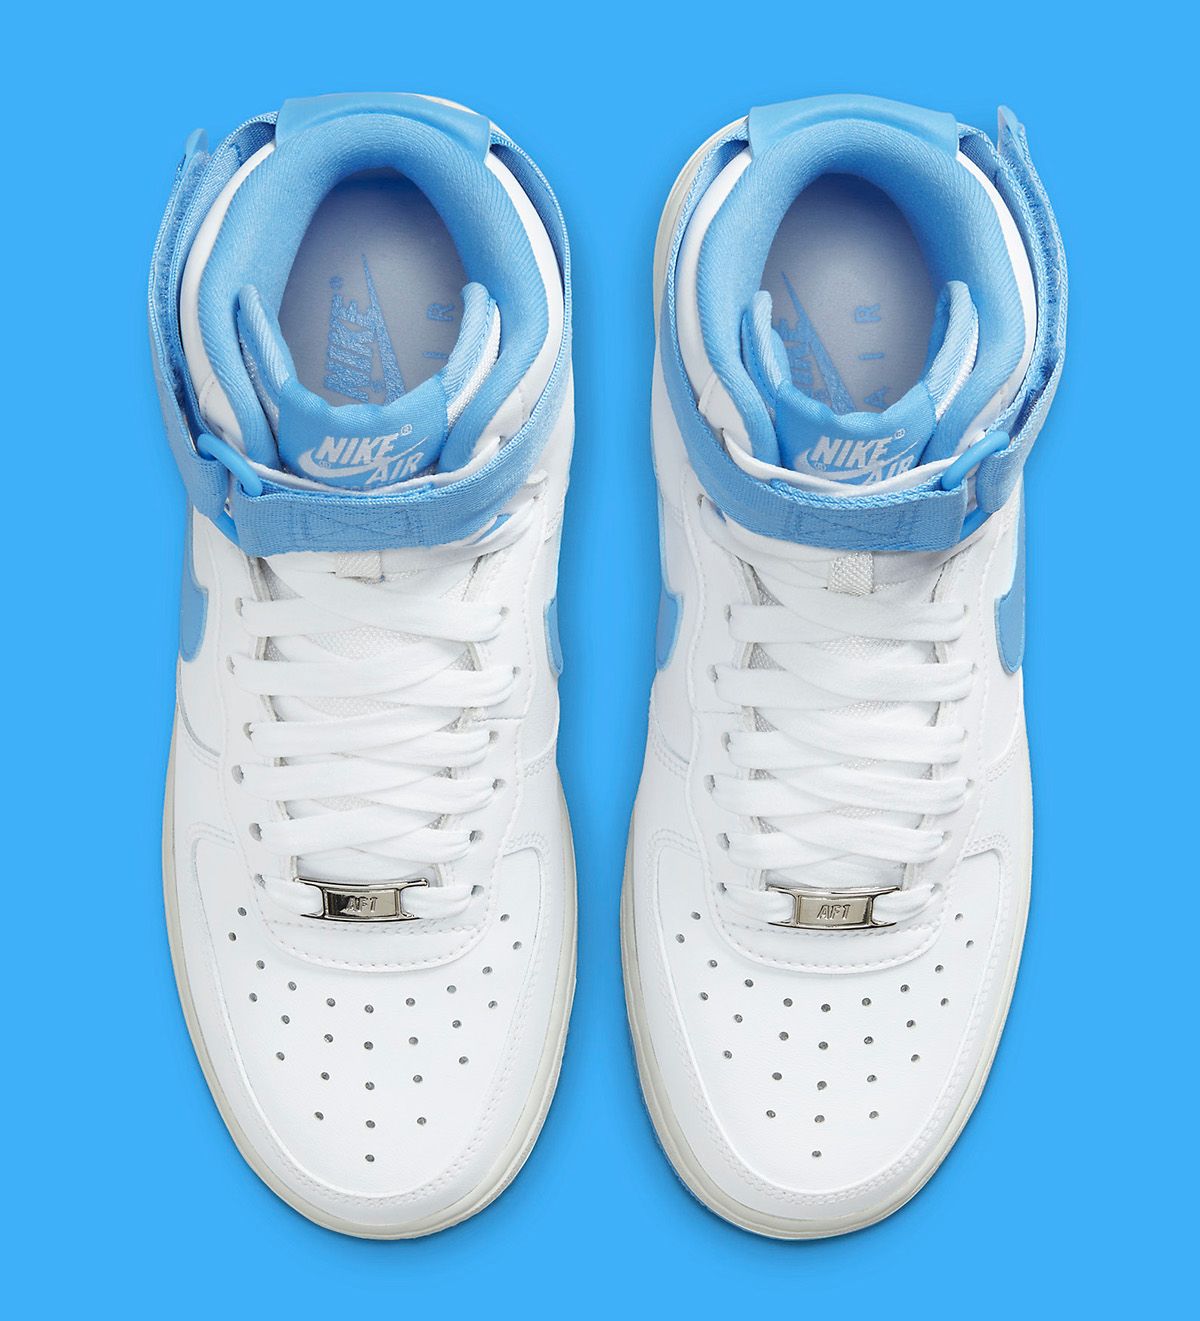 Nike Air Force 1 High "University Blue" Remembers Nike's "Color of